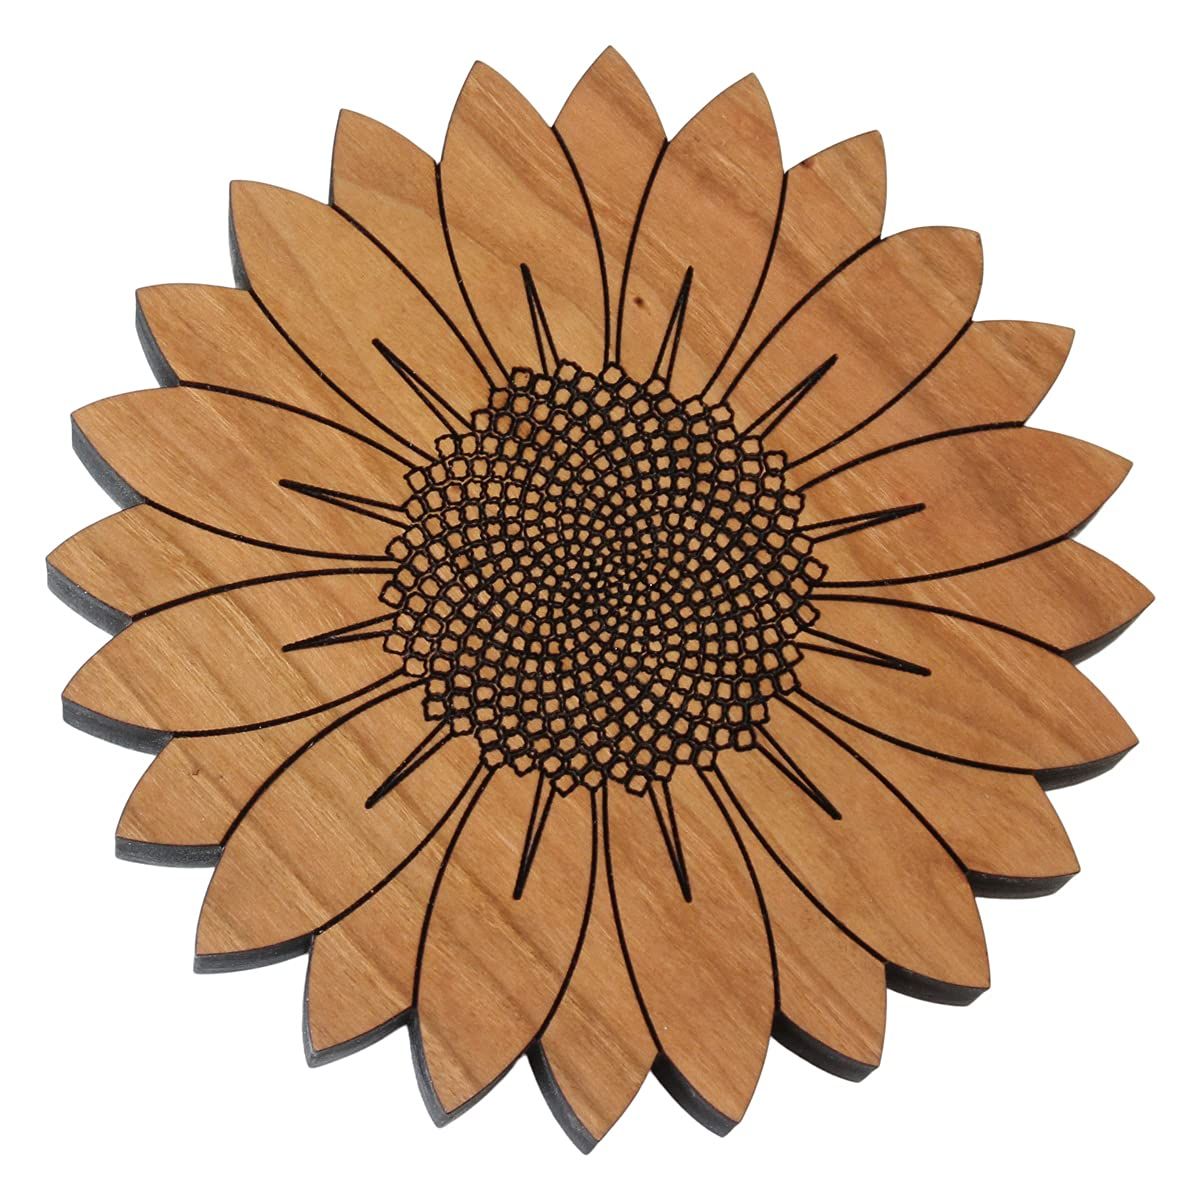 Sunflower Trivet - Hand Crafted in The USA From Solid Cherry Hardwood | Amazon (US)